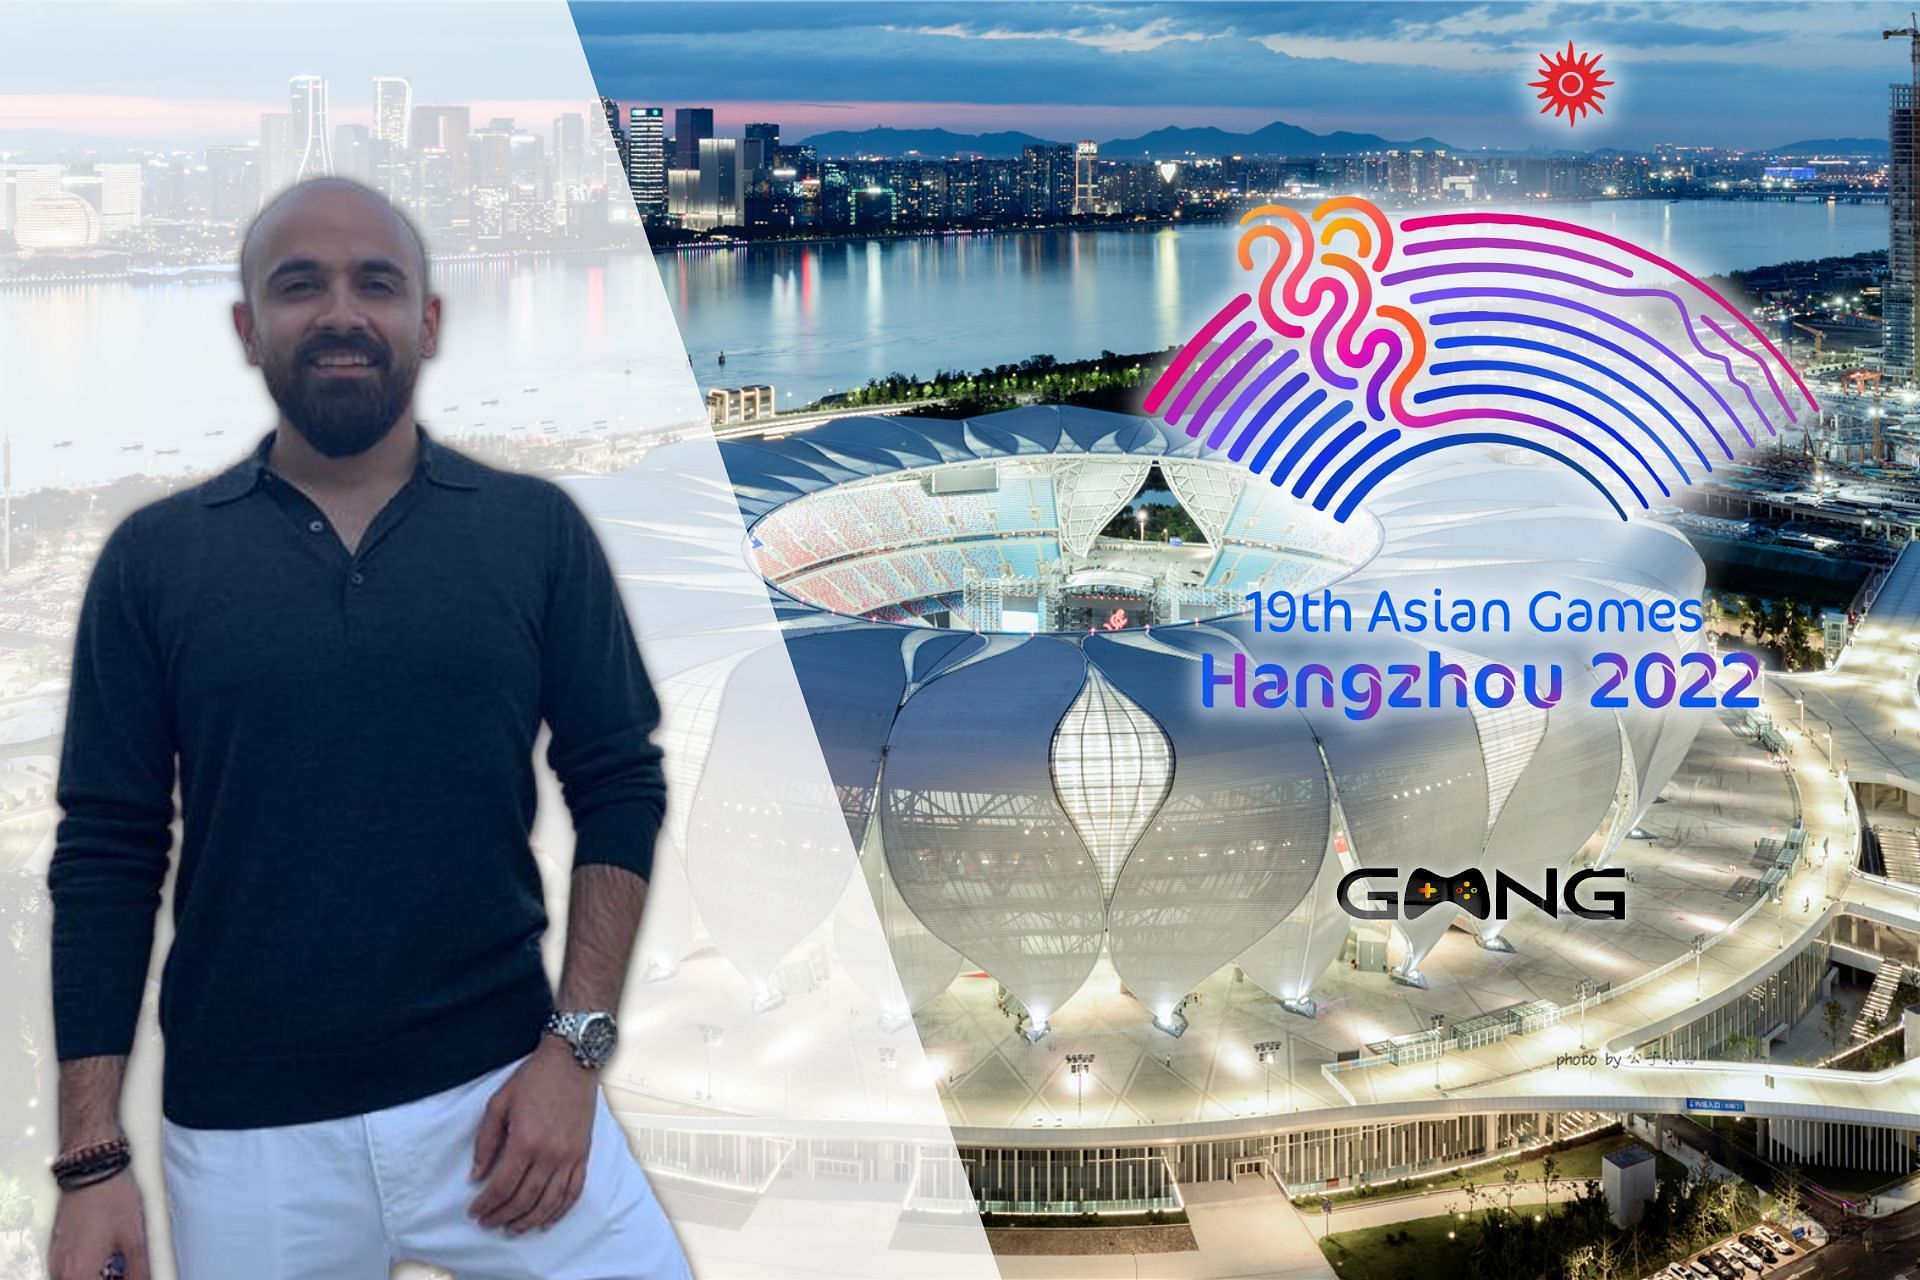 Aakash Taneja, Head of Product at GMNG, on the addition of esports as a medal event at the 2022 Asian Games